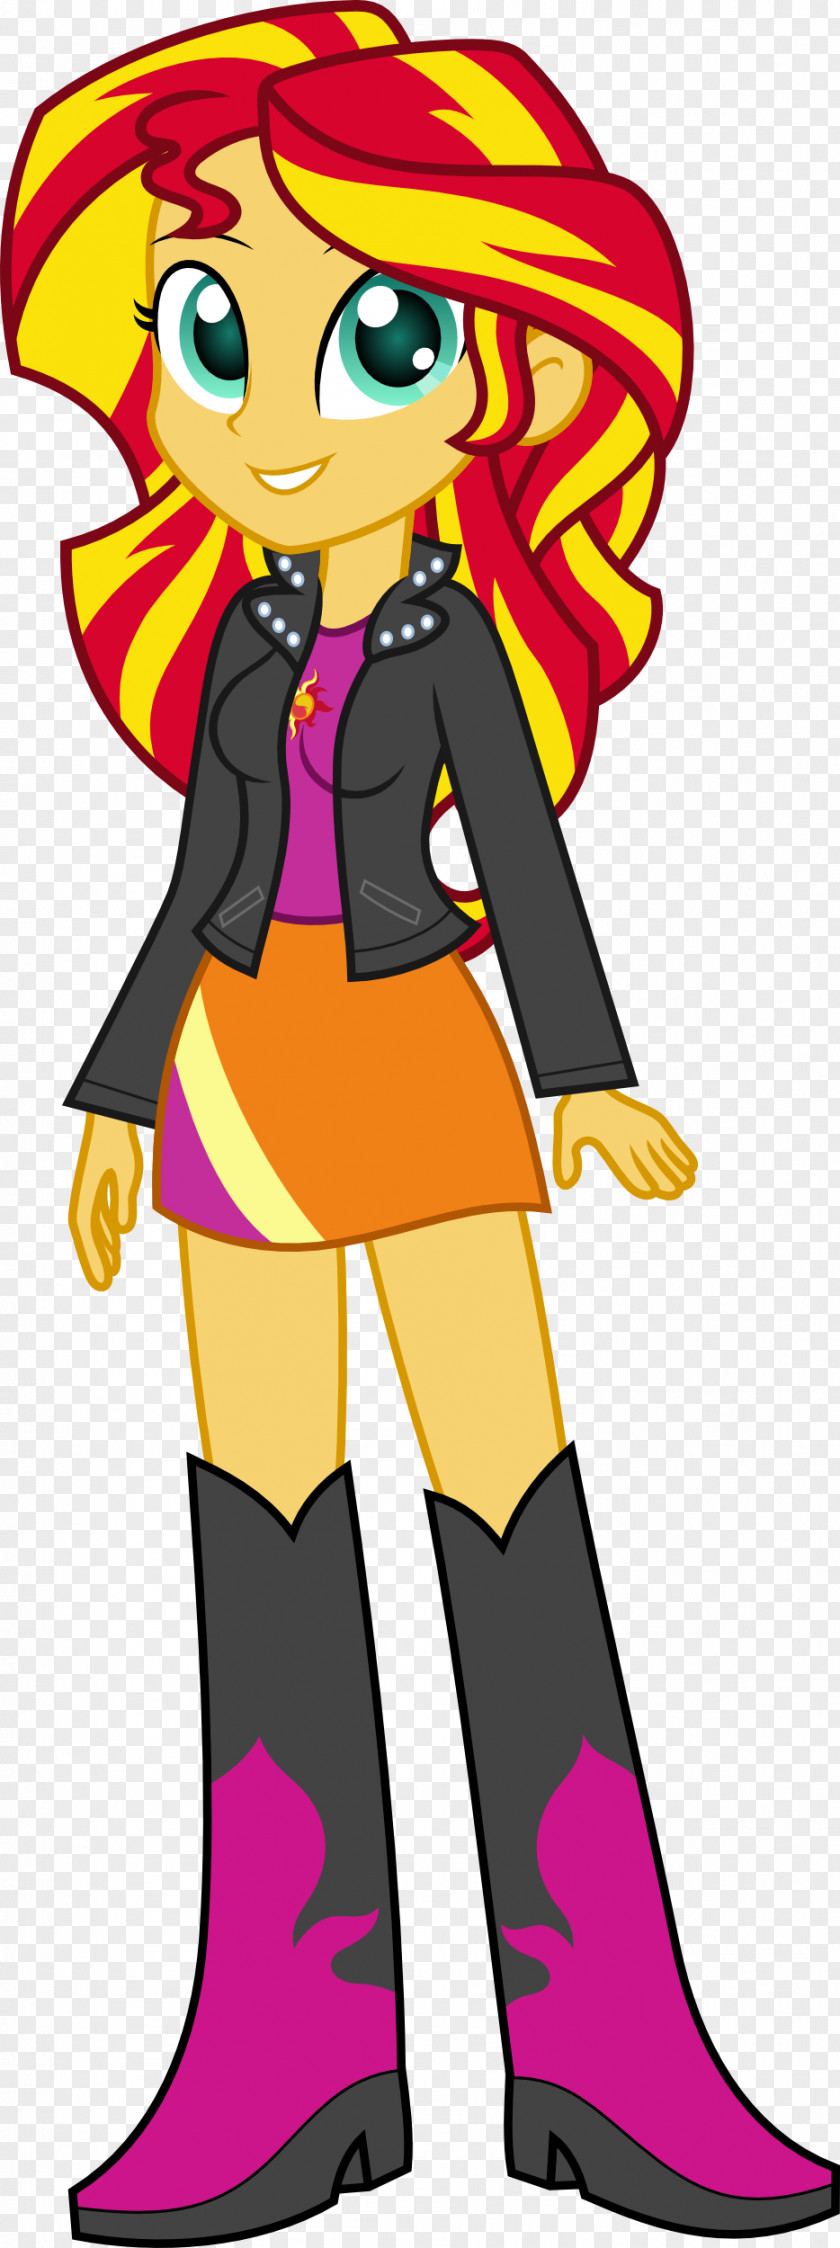 Sunset Shimmer Twilight Sparkle Pinkie Pie Fluttershy My Little Pony: Equestria Girls PNG